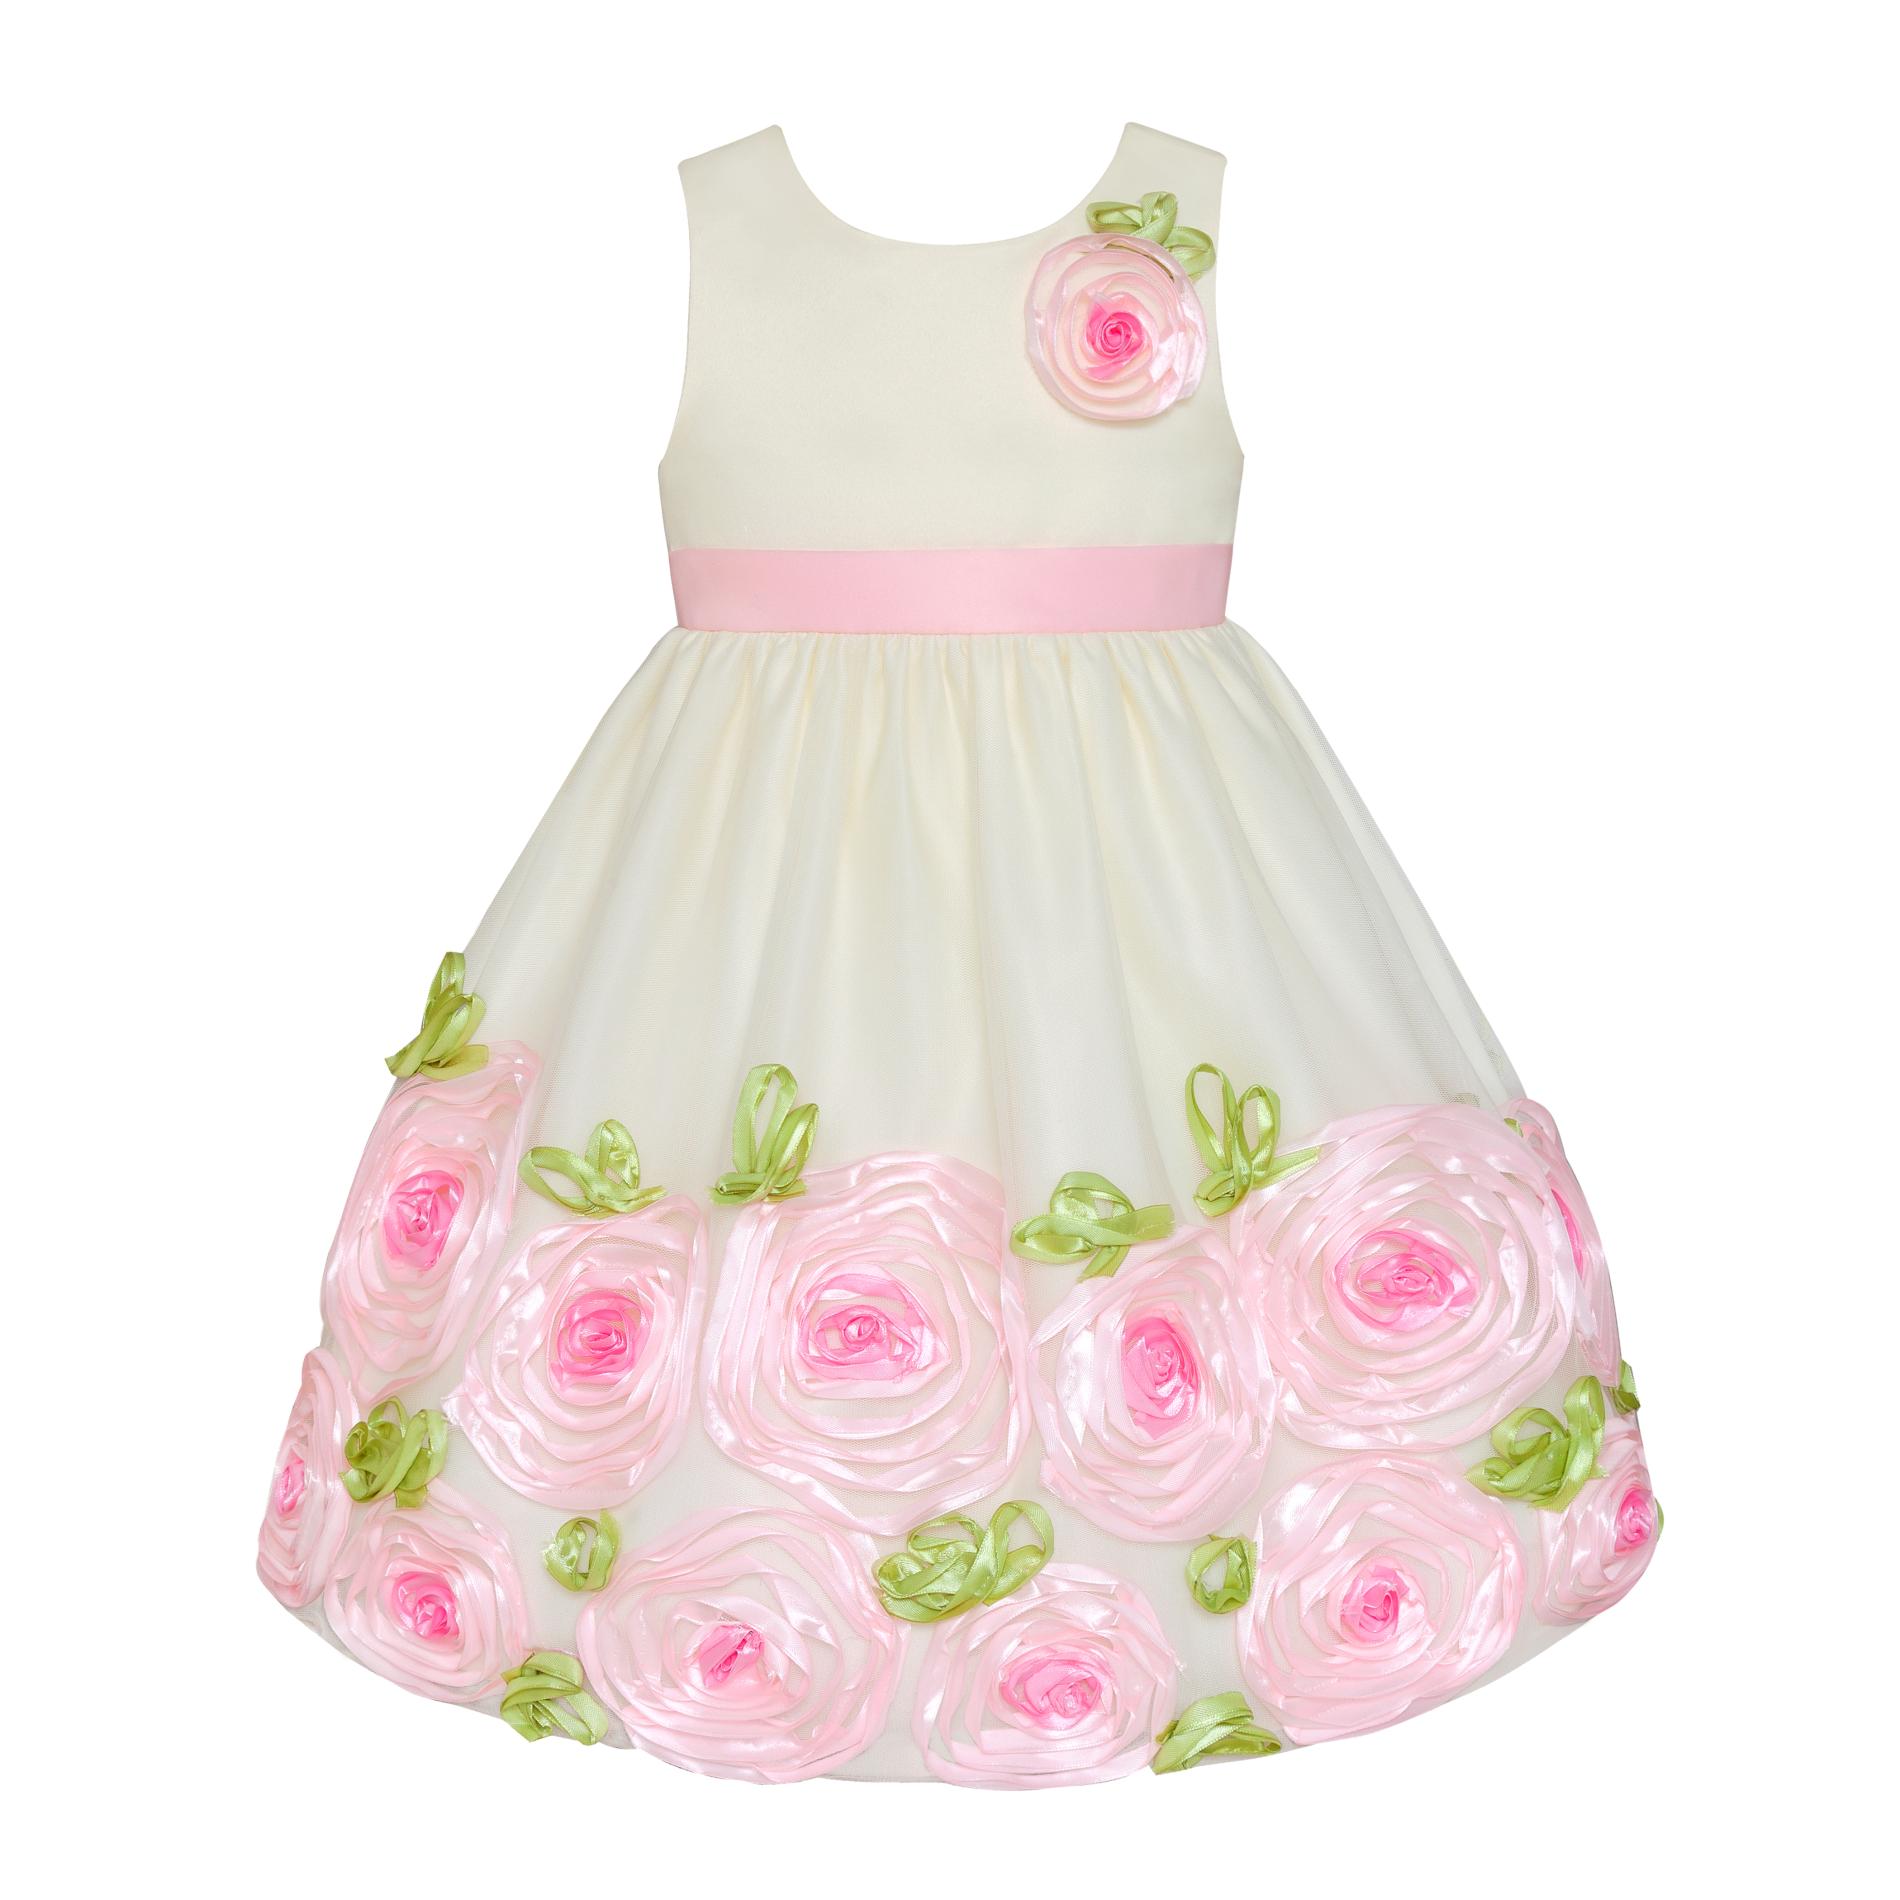 American Princess Infant & Toddler Girl's Party Dress